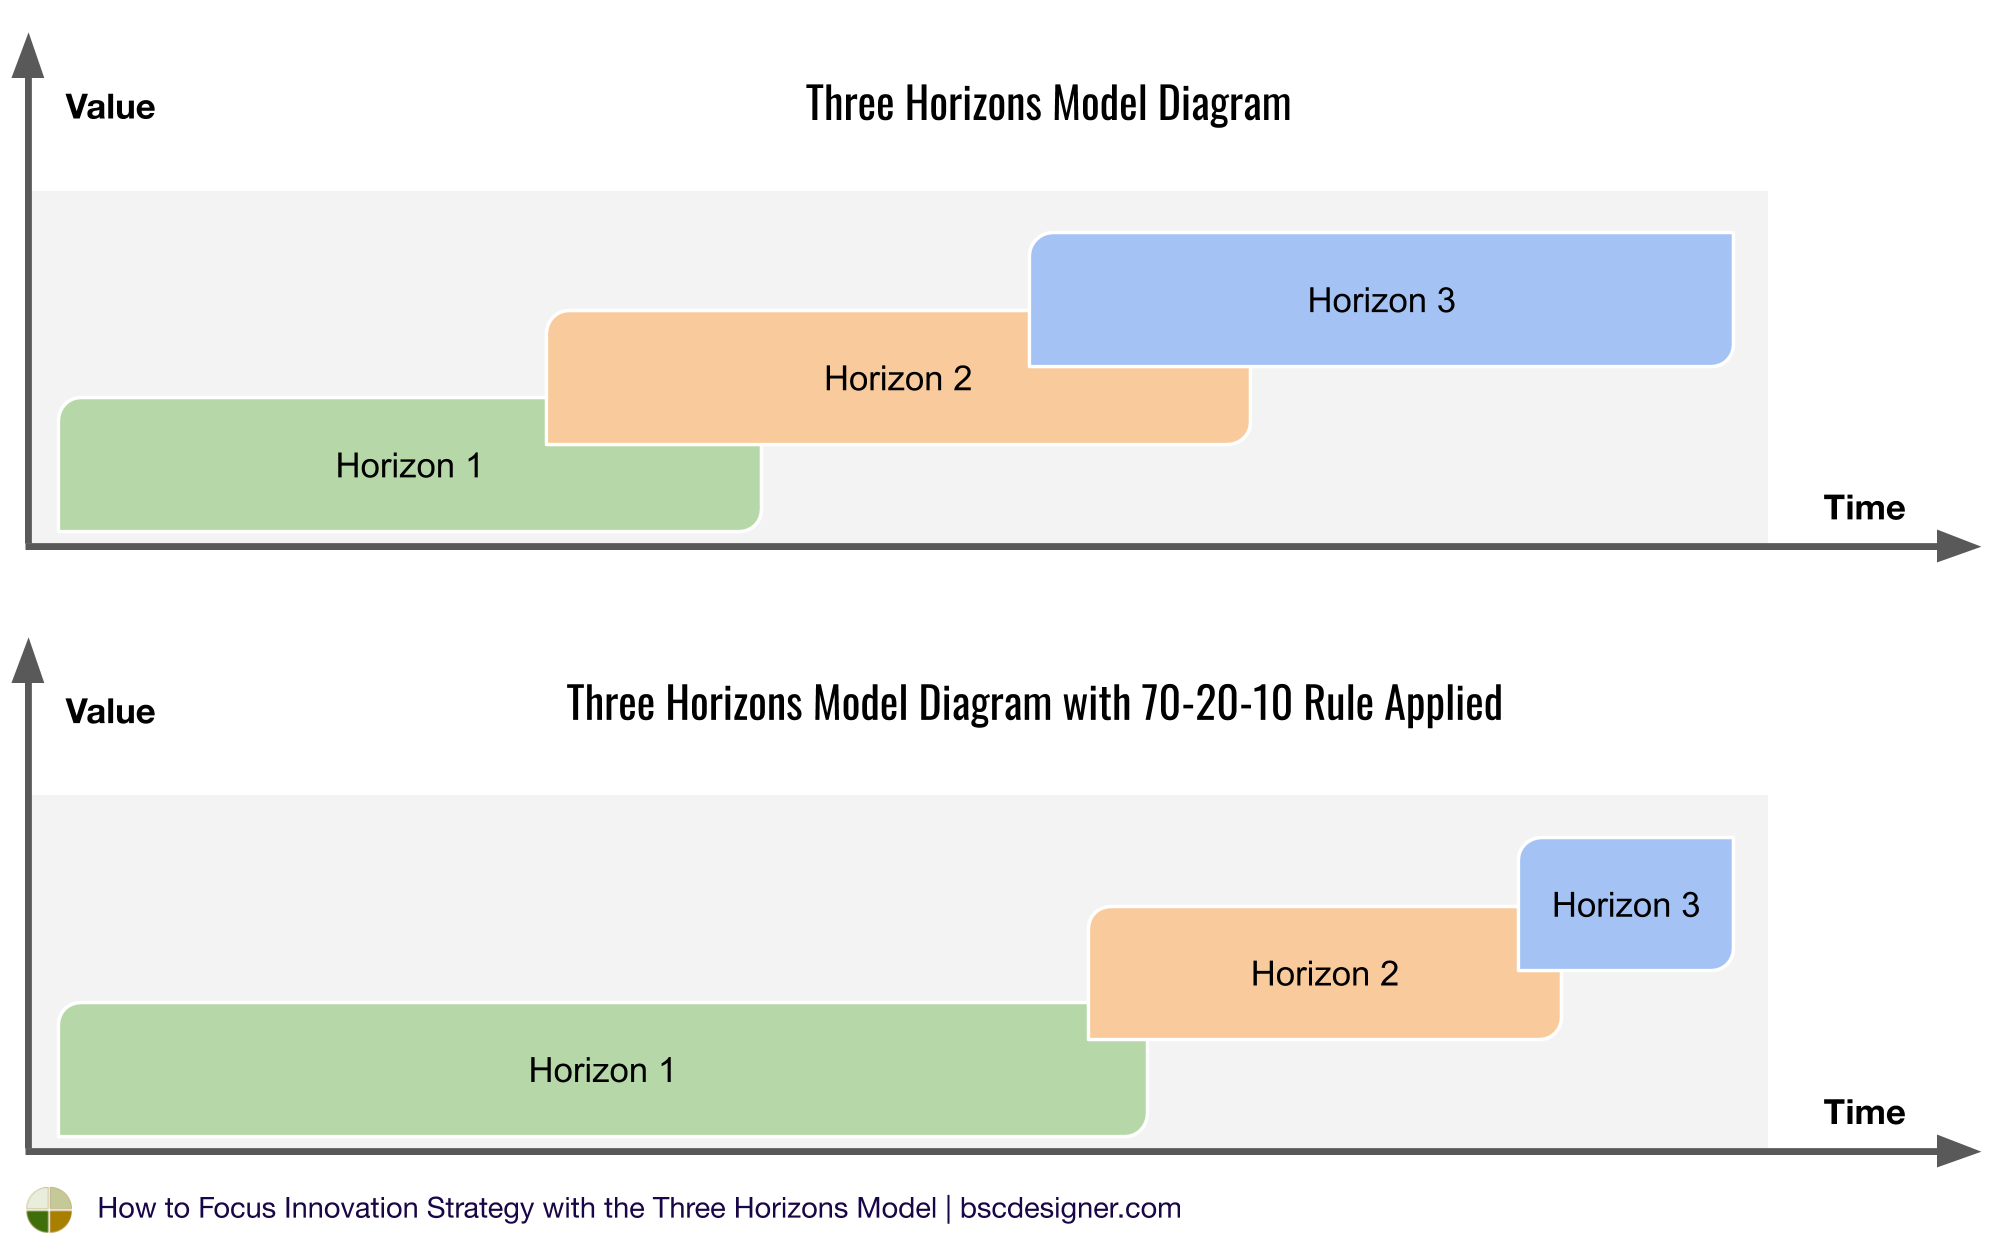 Three Horizons Model Diagram with 70-20-10 Rule Applied